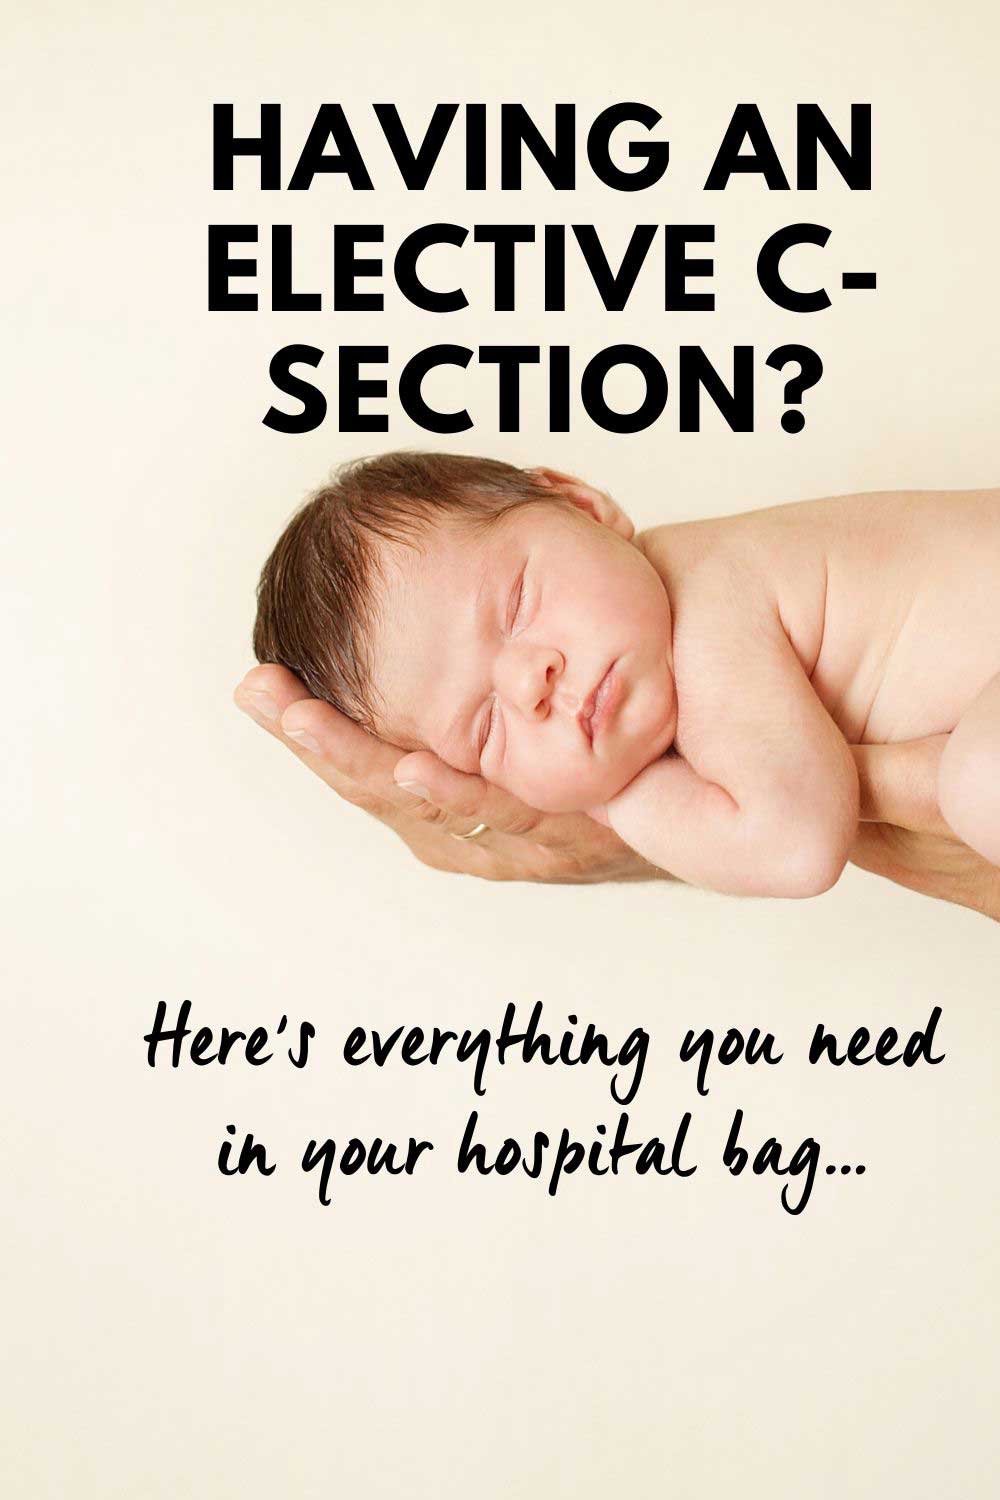 Having an elective c-section? Here's everything you need in your hospital bag